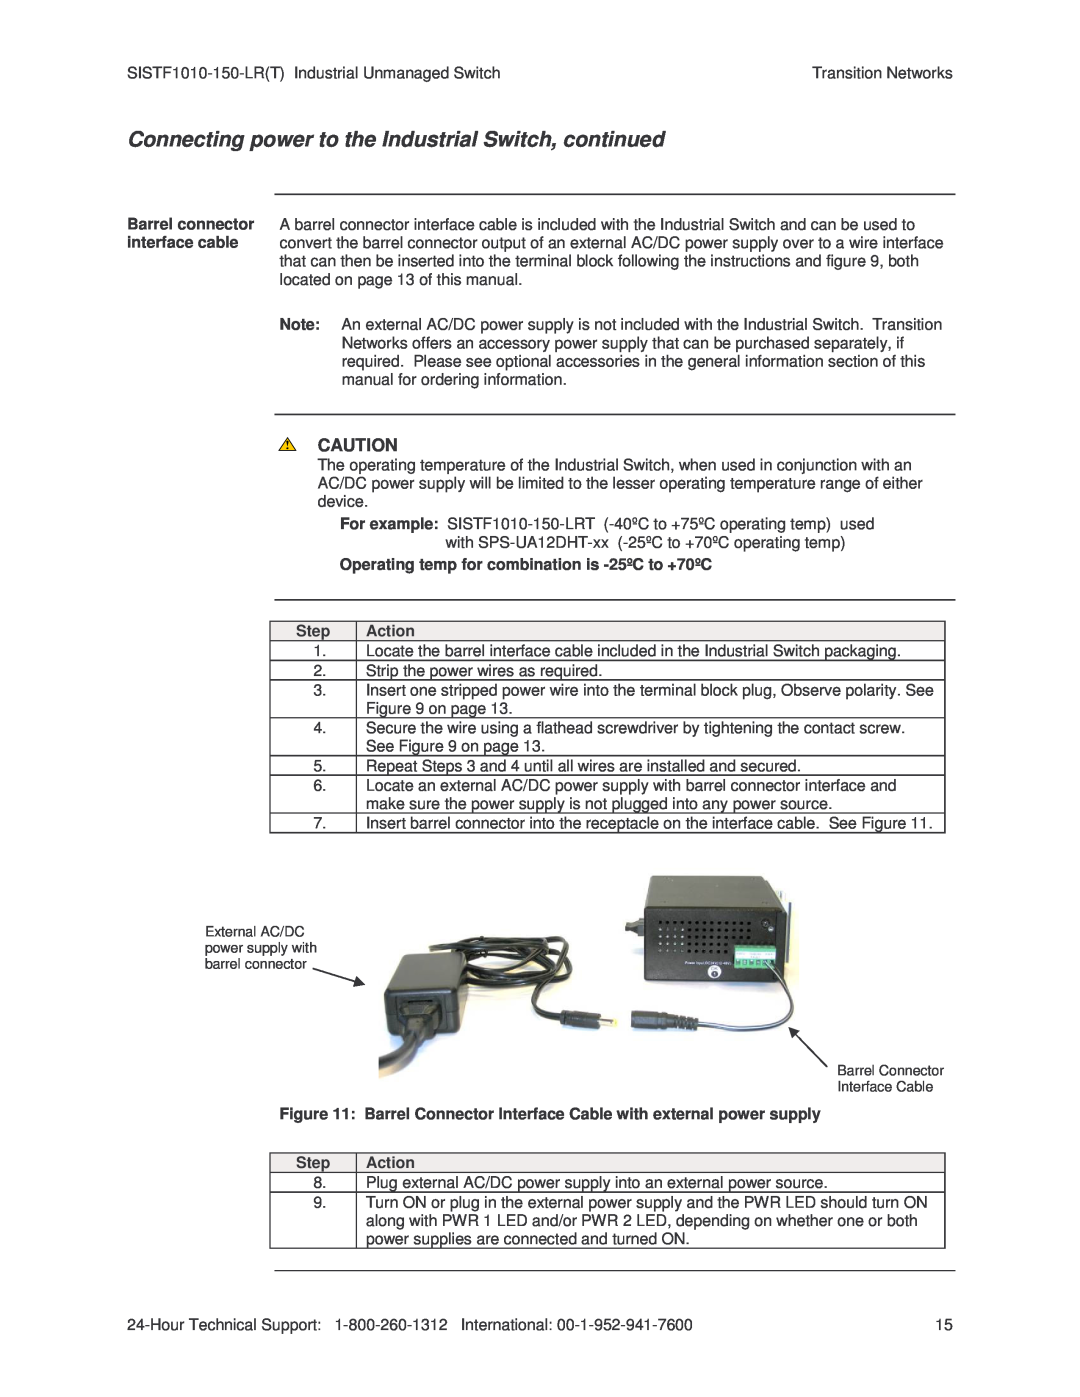 Transition Networks SISTF1010-150-LR(T) installation manual Connecting power to the Industrial Switch, continued 